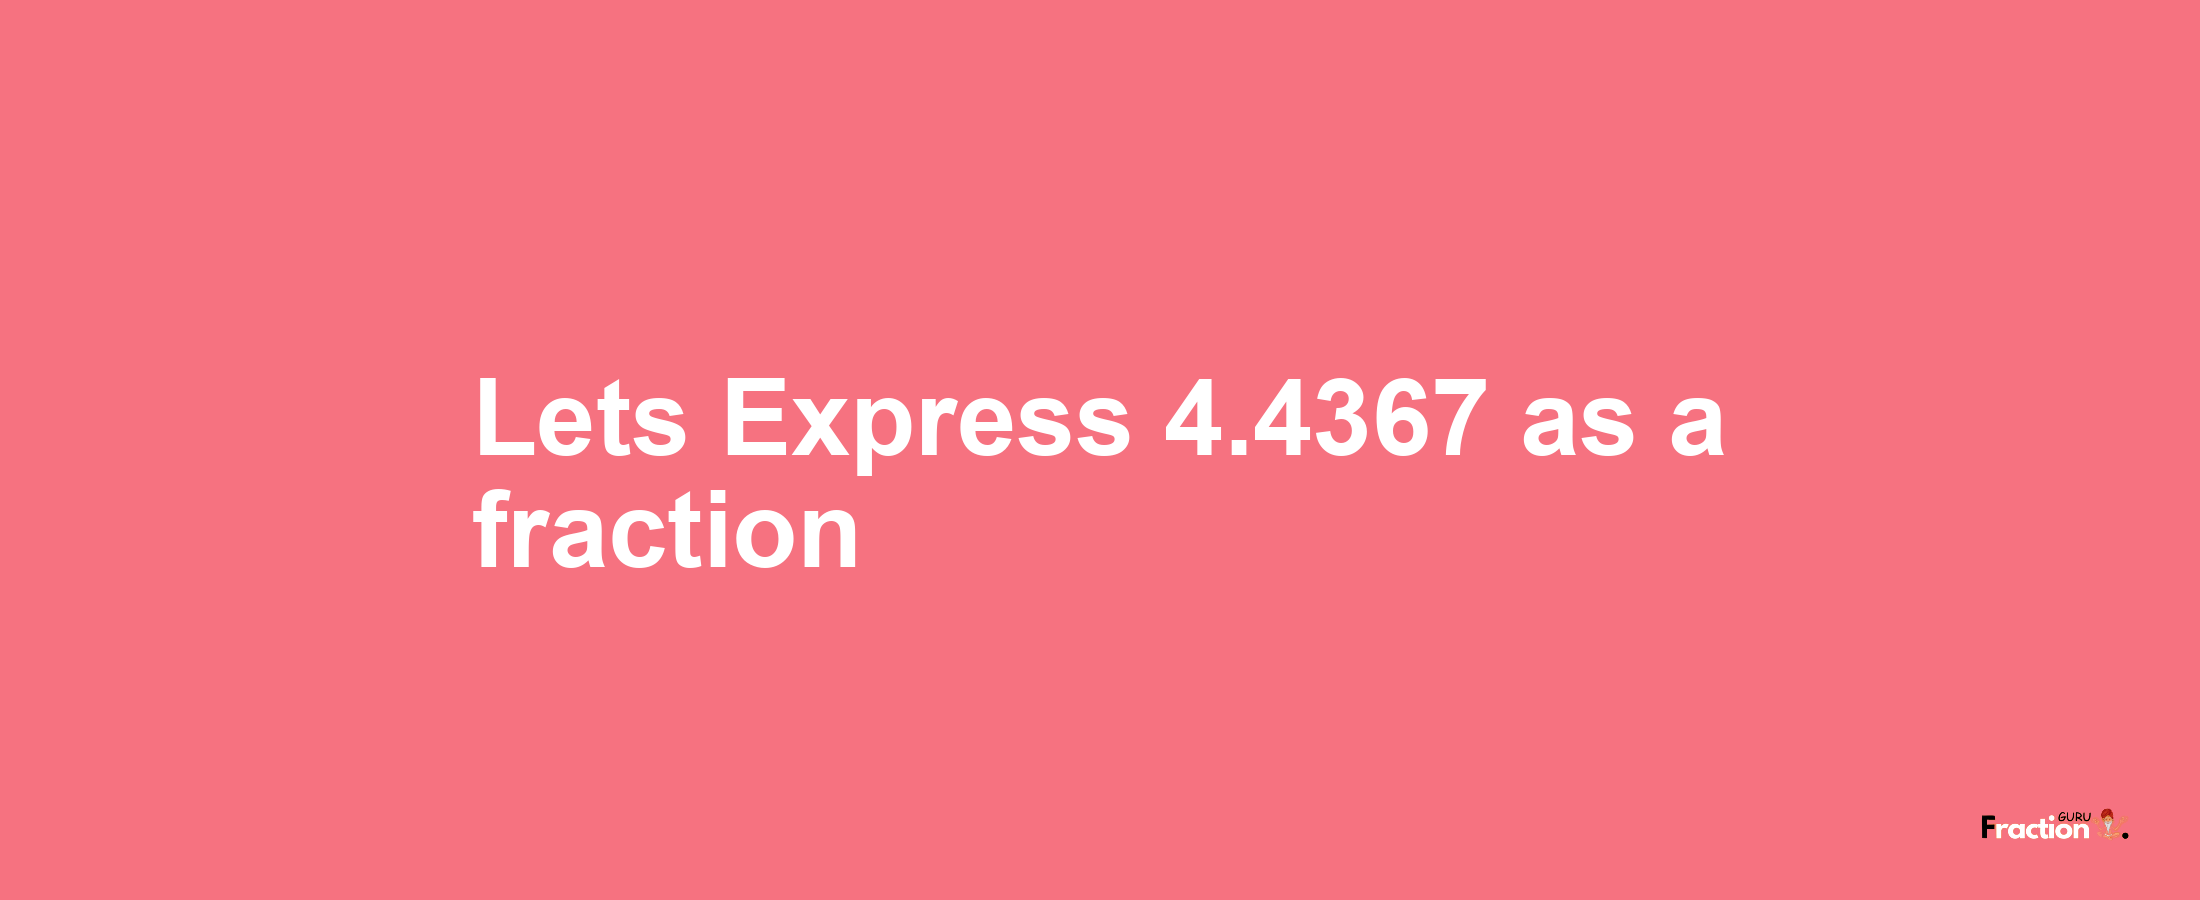 Lets Express 4.4367 as afraction